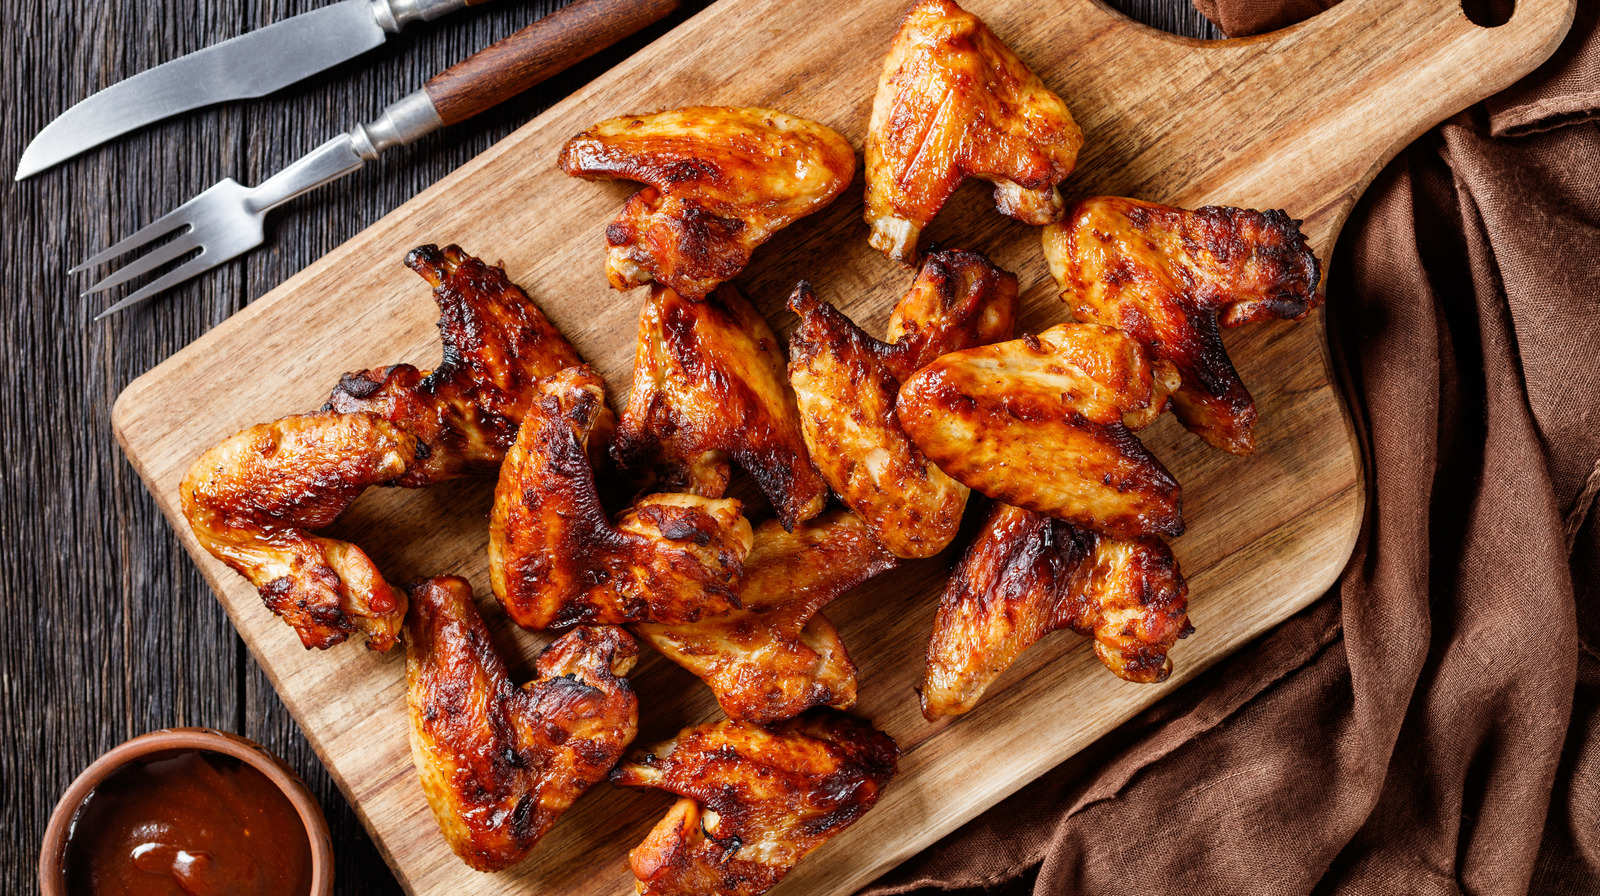 Drink Powder Is The Unexpected Ingredient For Flavorful Wings - Tasting Table